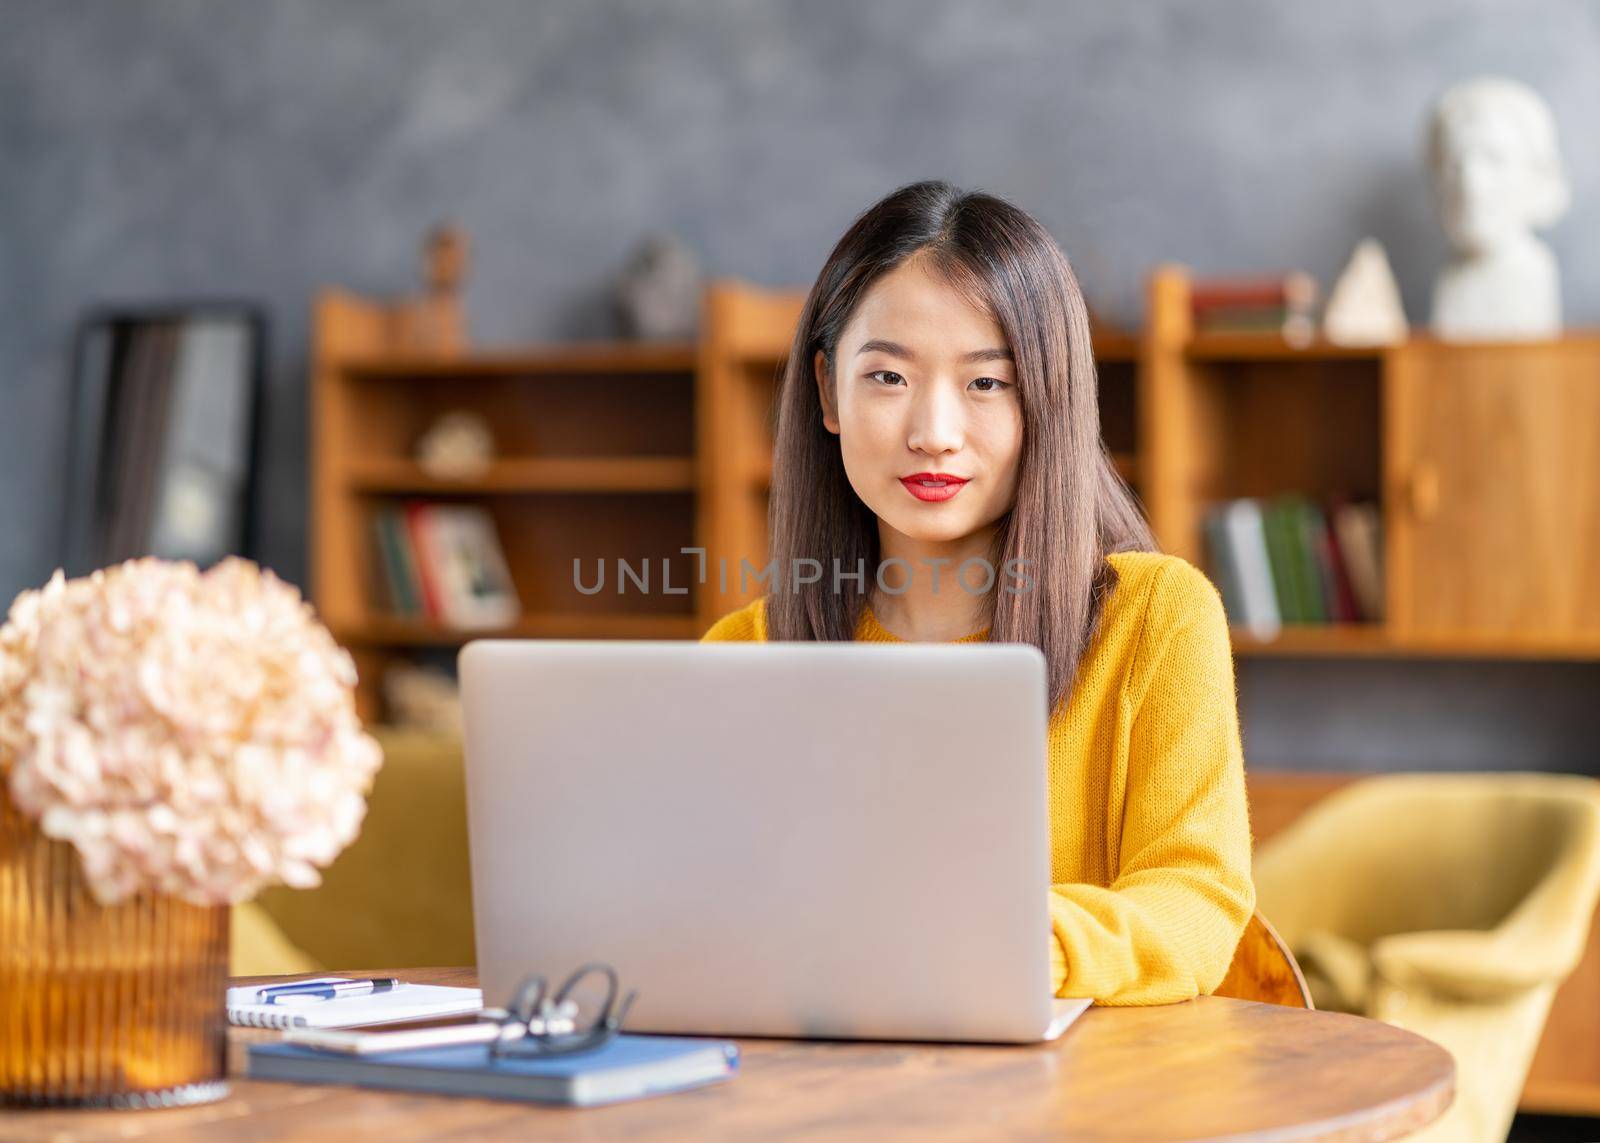 Asian woman working on laptop at home or in cafe. Young lady in bright yellow jumper is sitting at desk typing on computer. Business oriental female in front of window